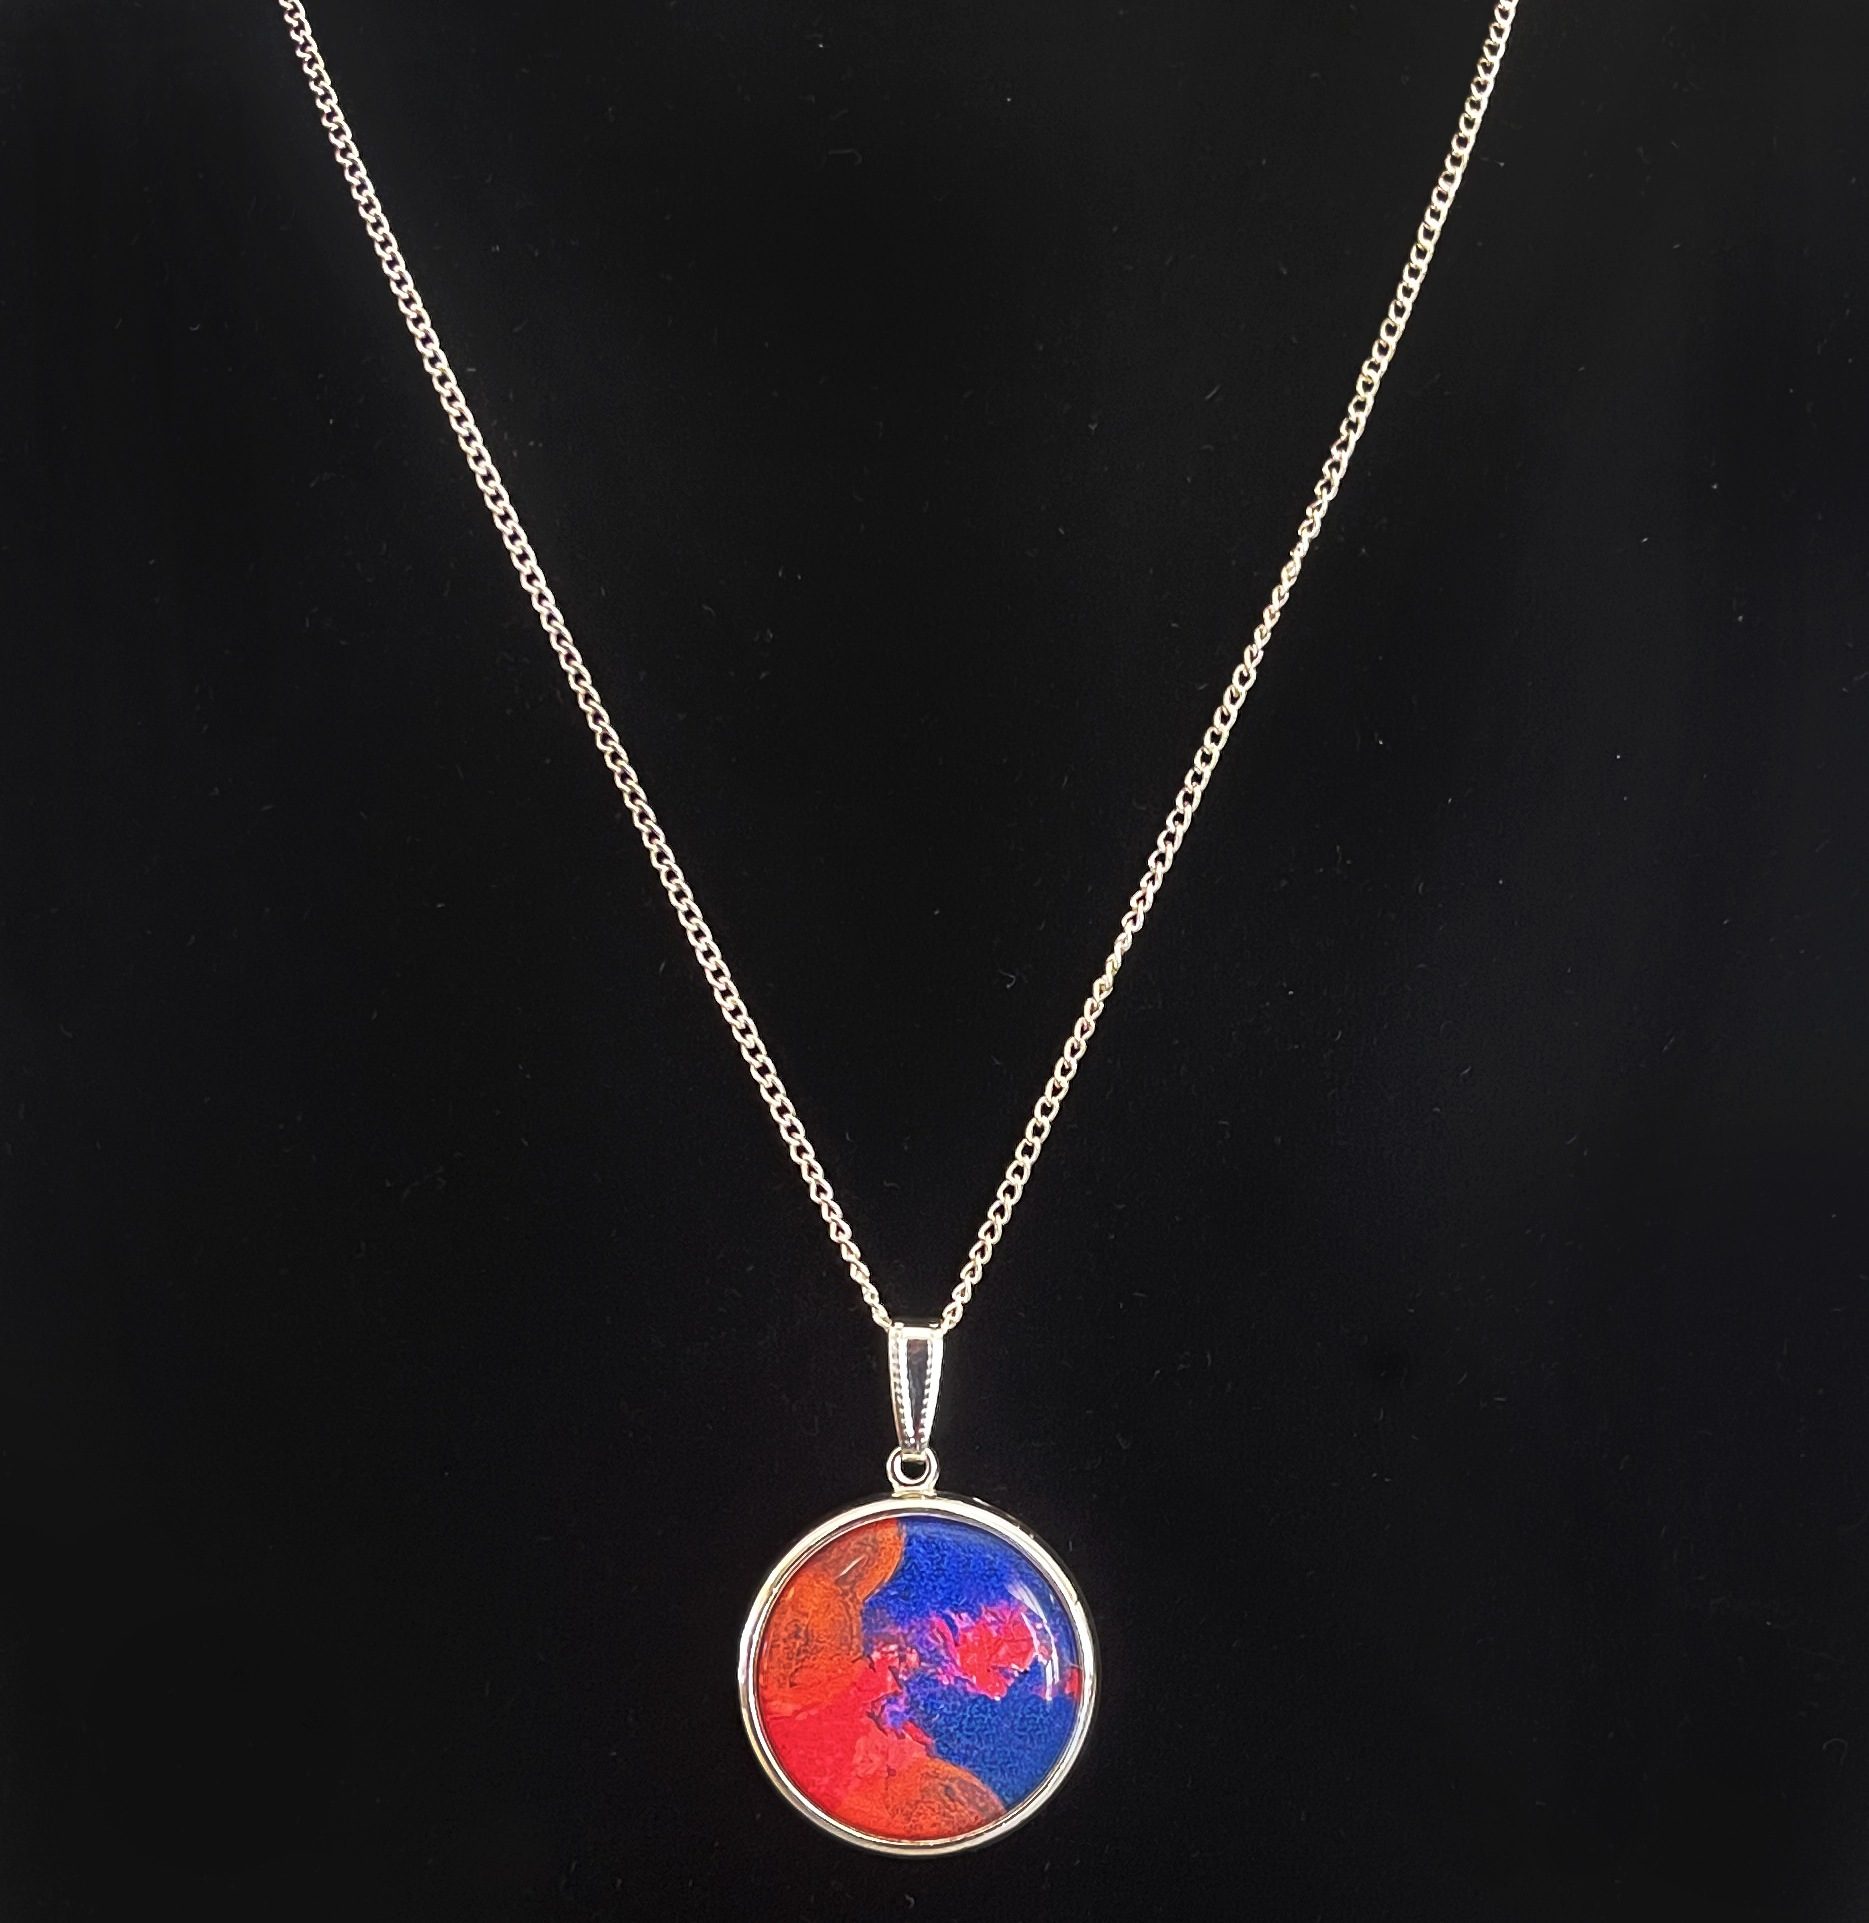 Silver pendant necklace based on a painting by artist Amy Myers titled "No Solutions Yet" featuring shades of blue, orange, and red.